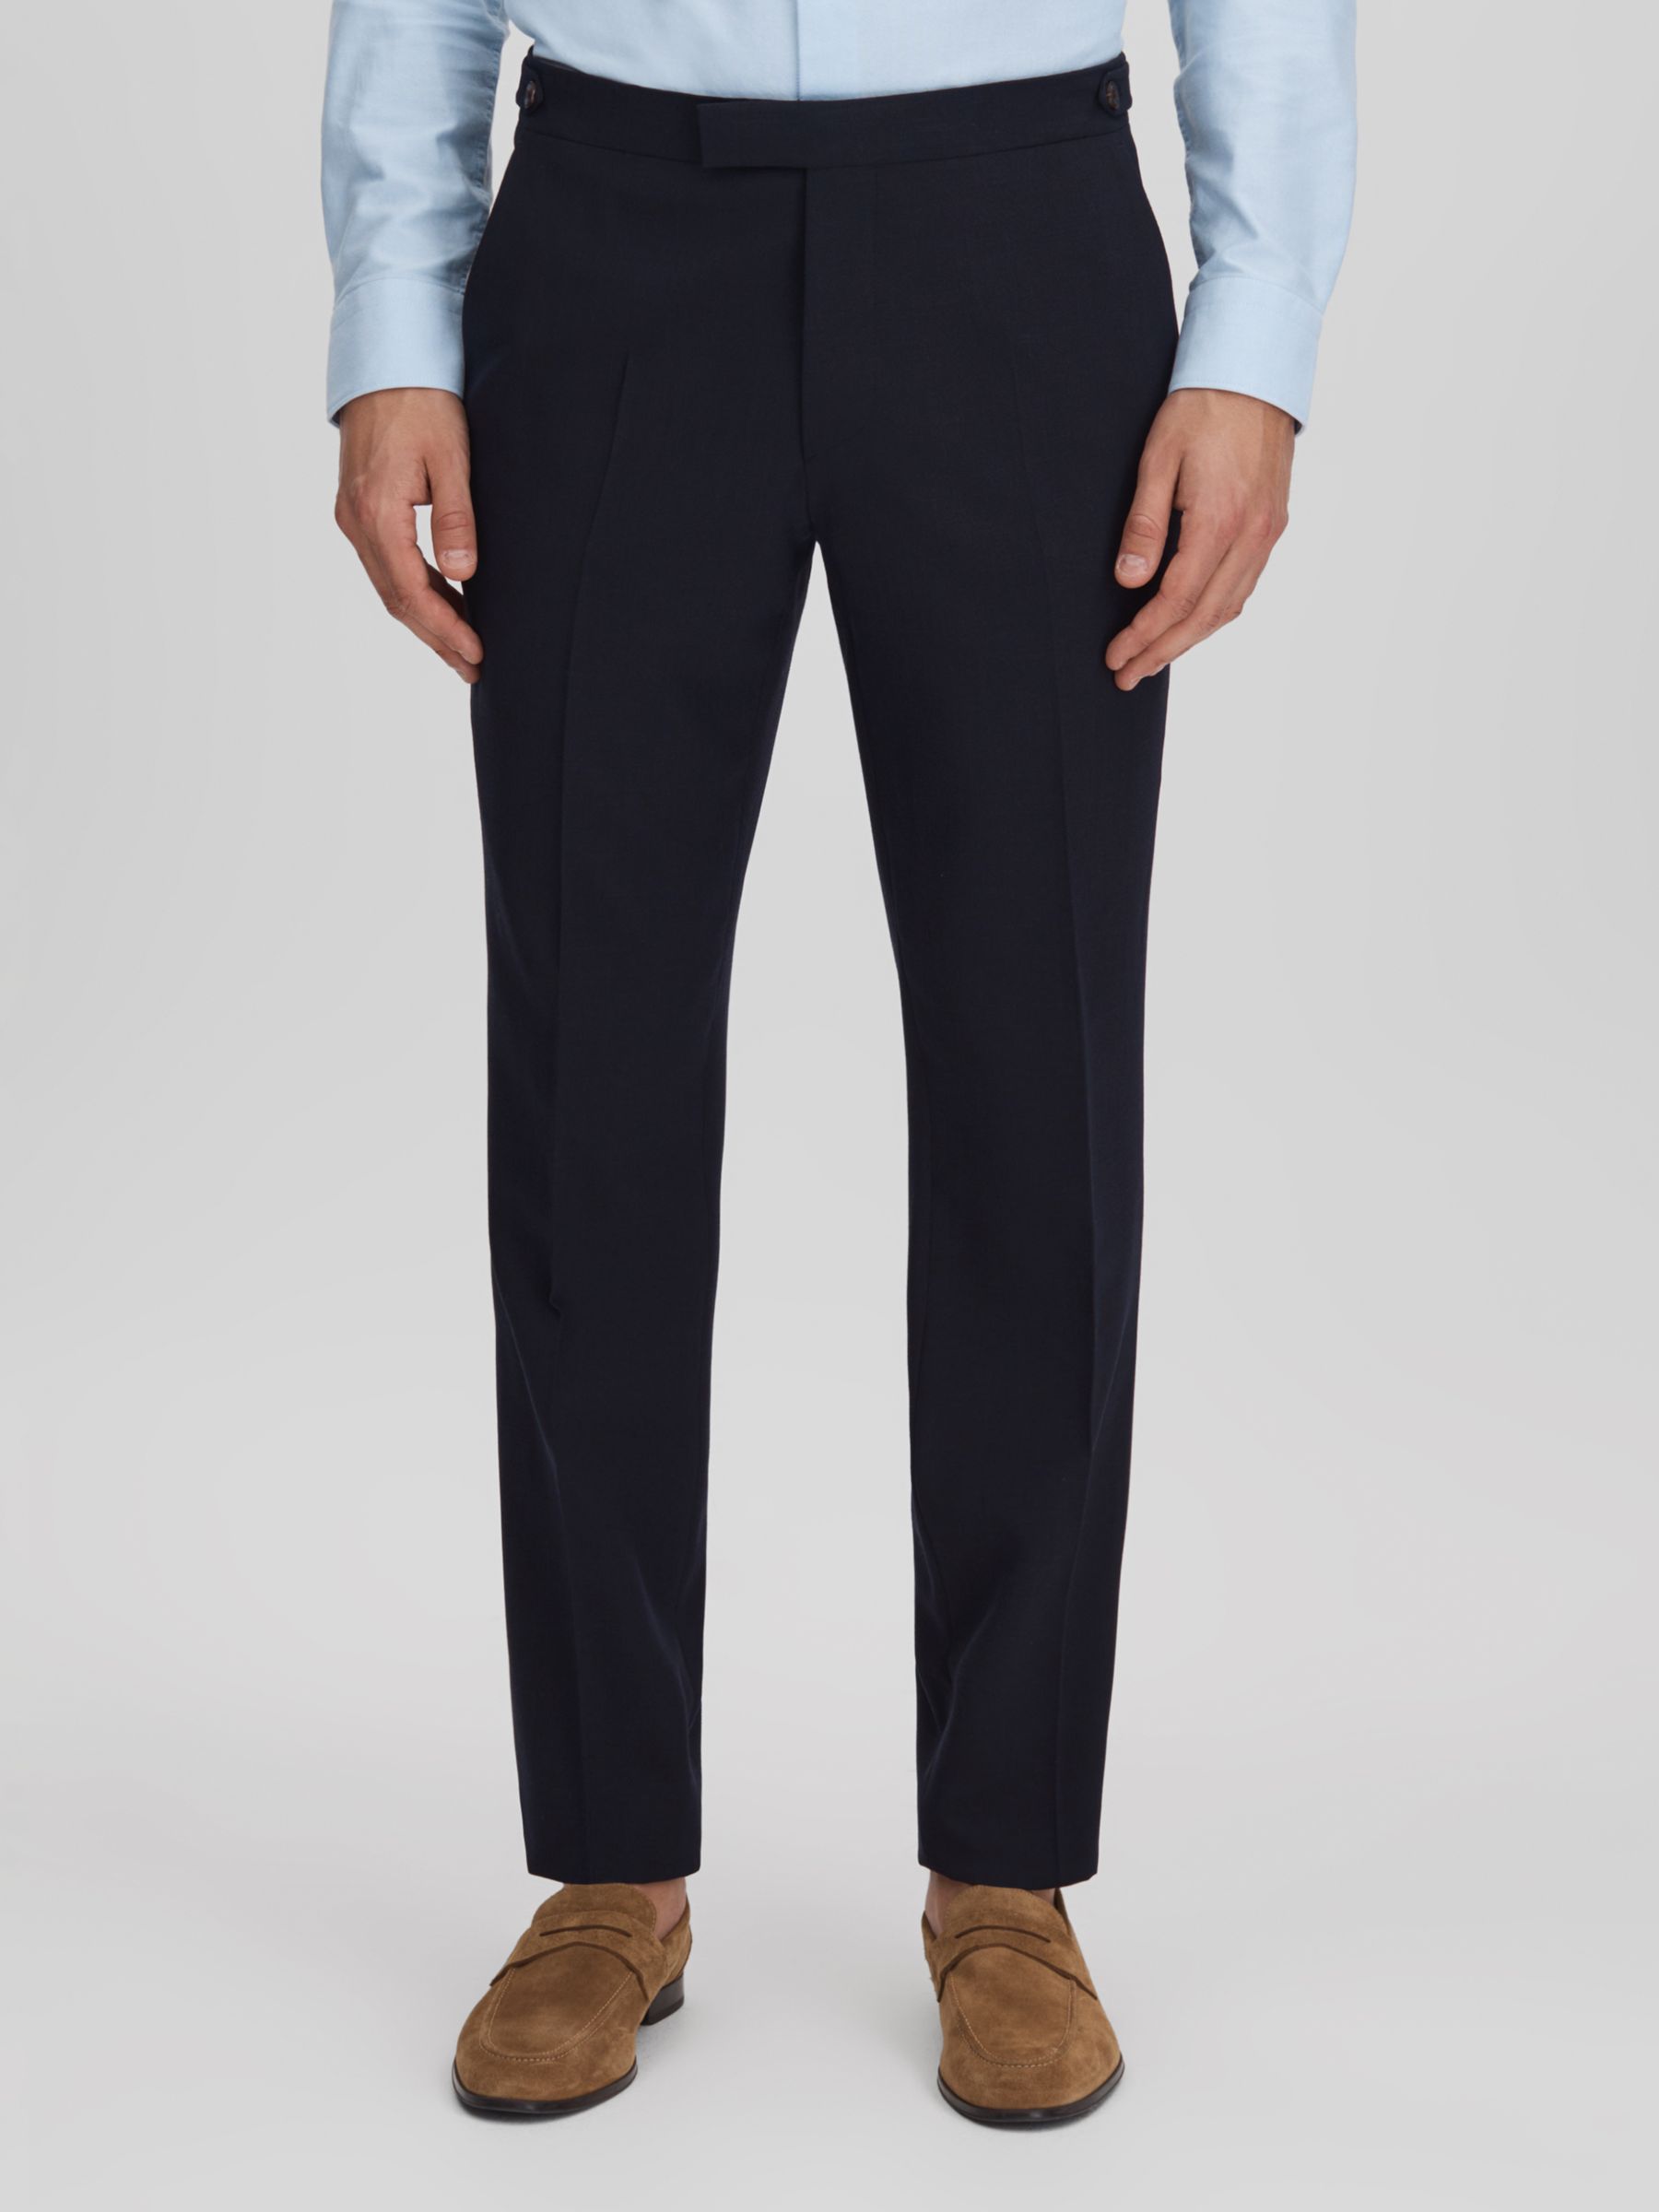 Reiss Belmont Textured Trousers, Navy, 38R